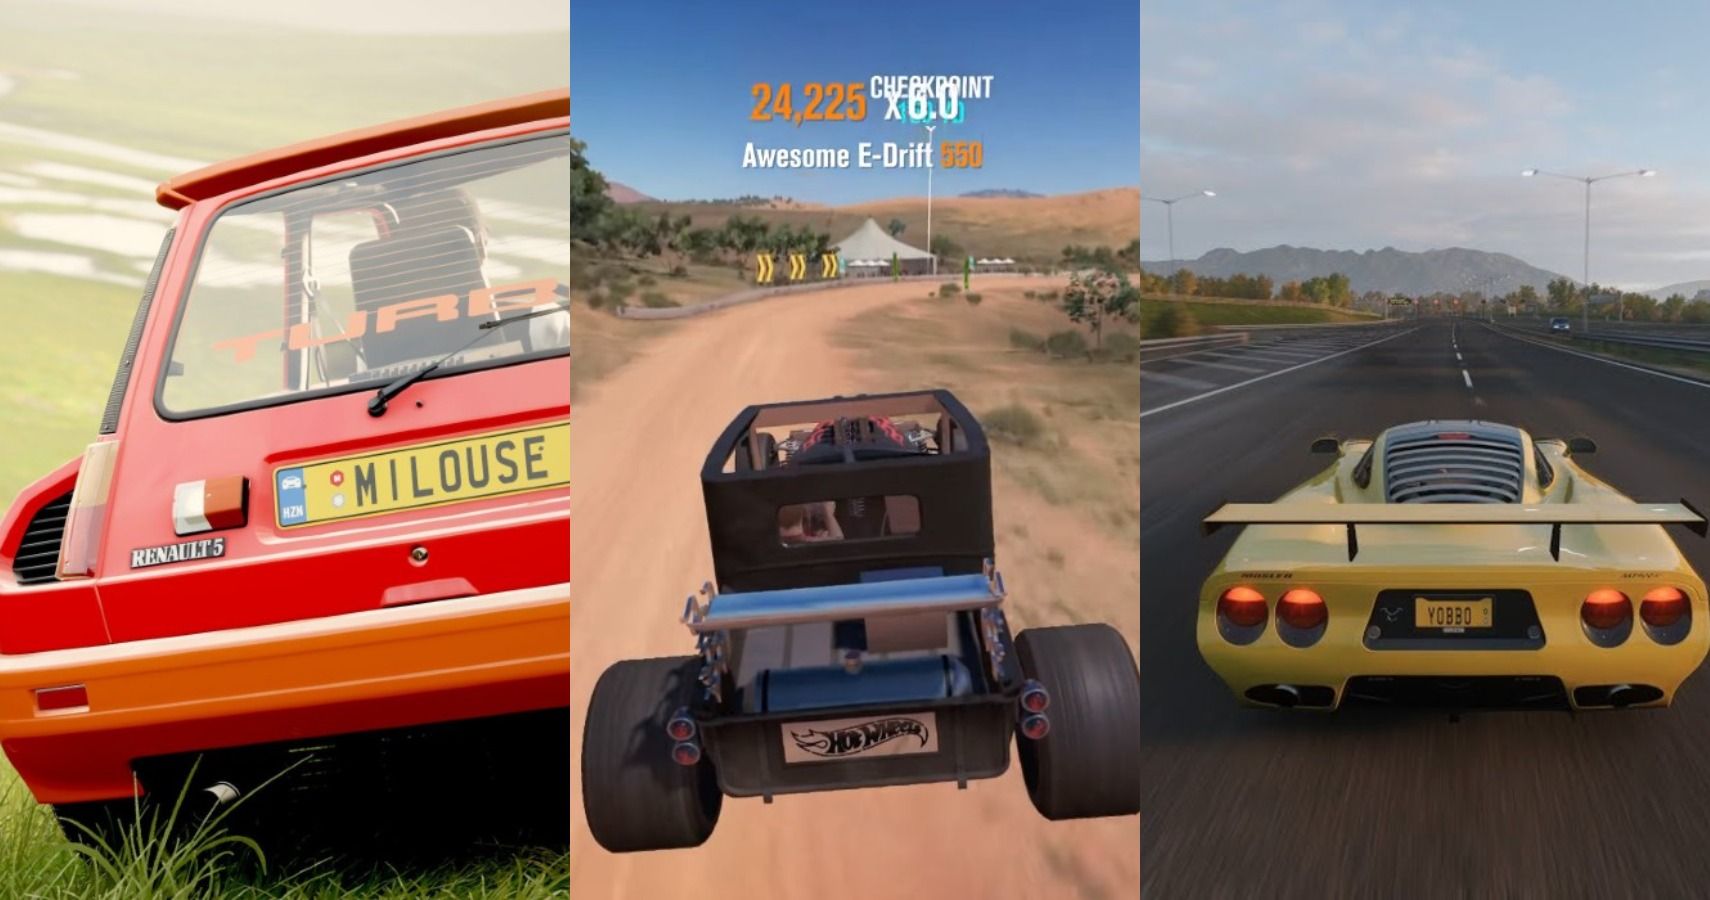 Forza Horizon 4 Best Cars for Forzathon Live Featured split image Bone Shaker, Renault, and Mosler MT900s